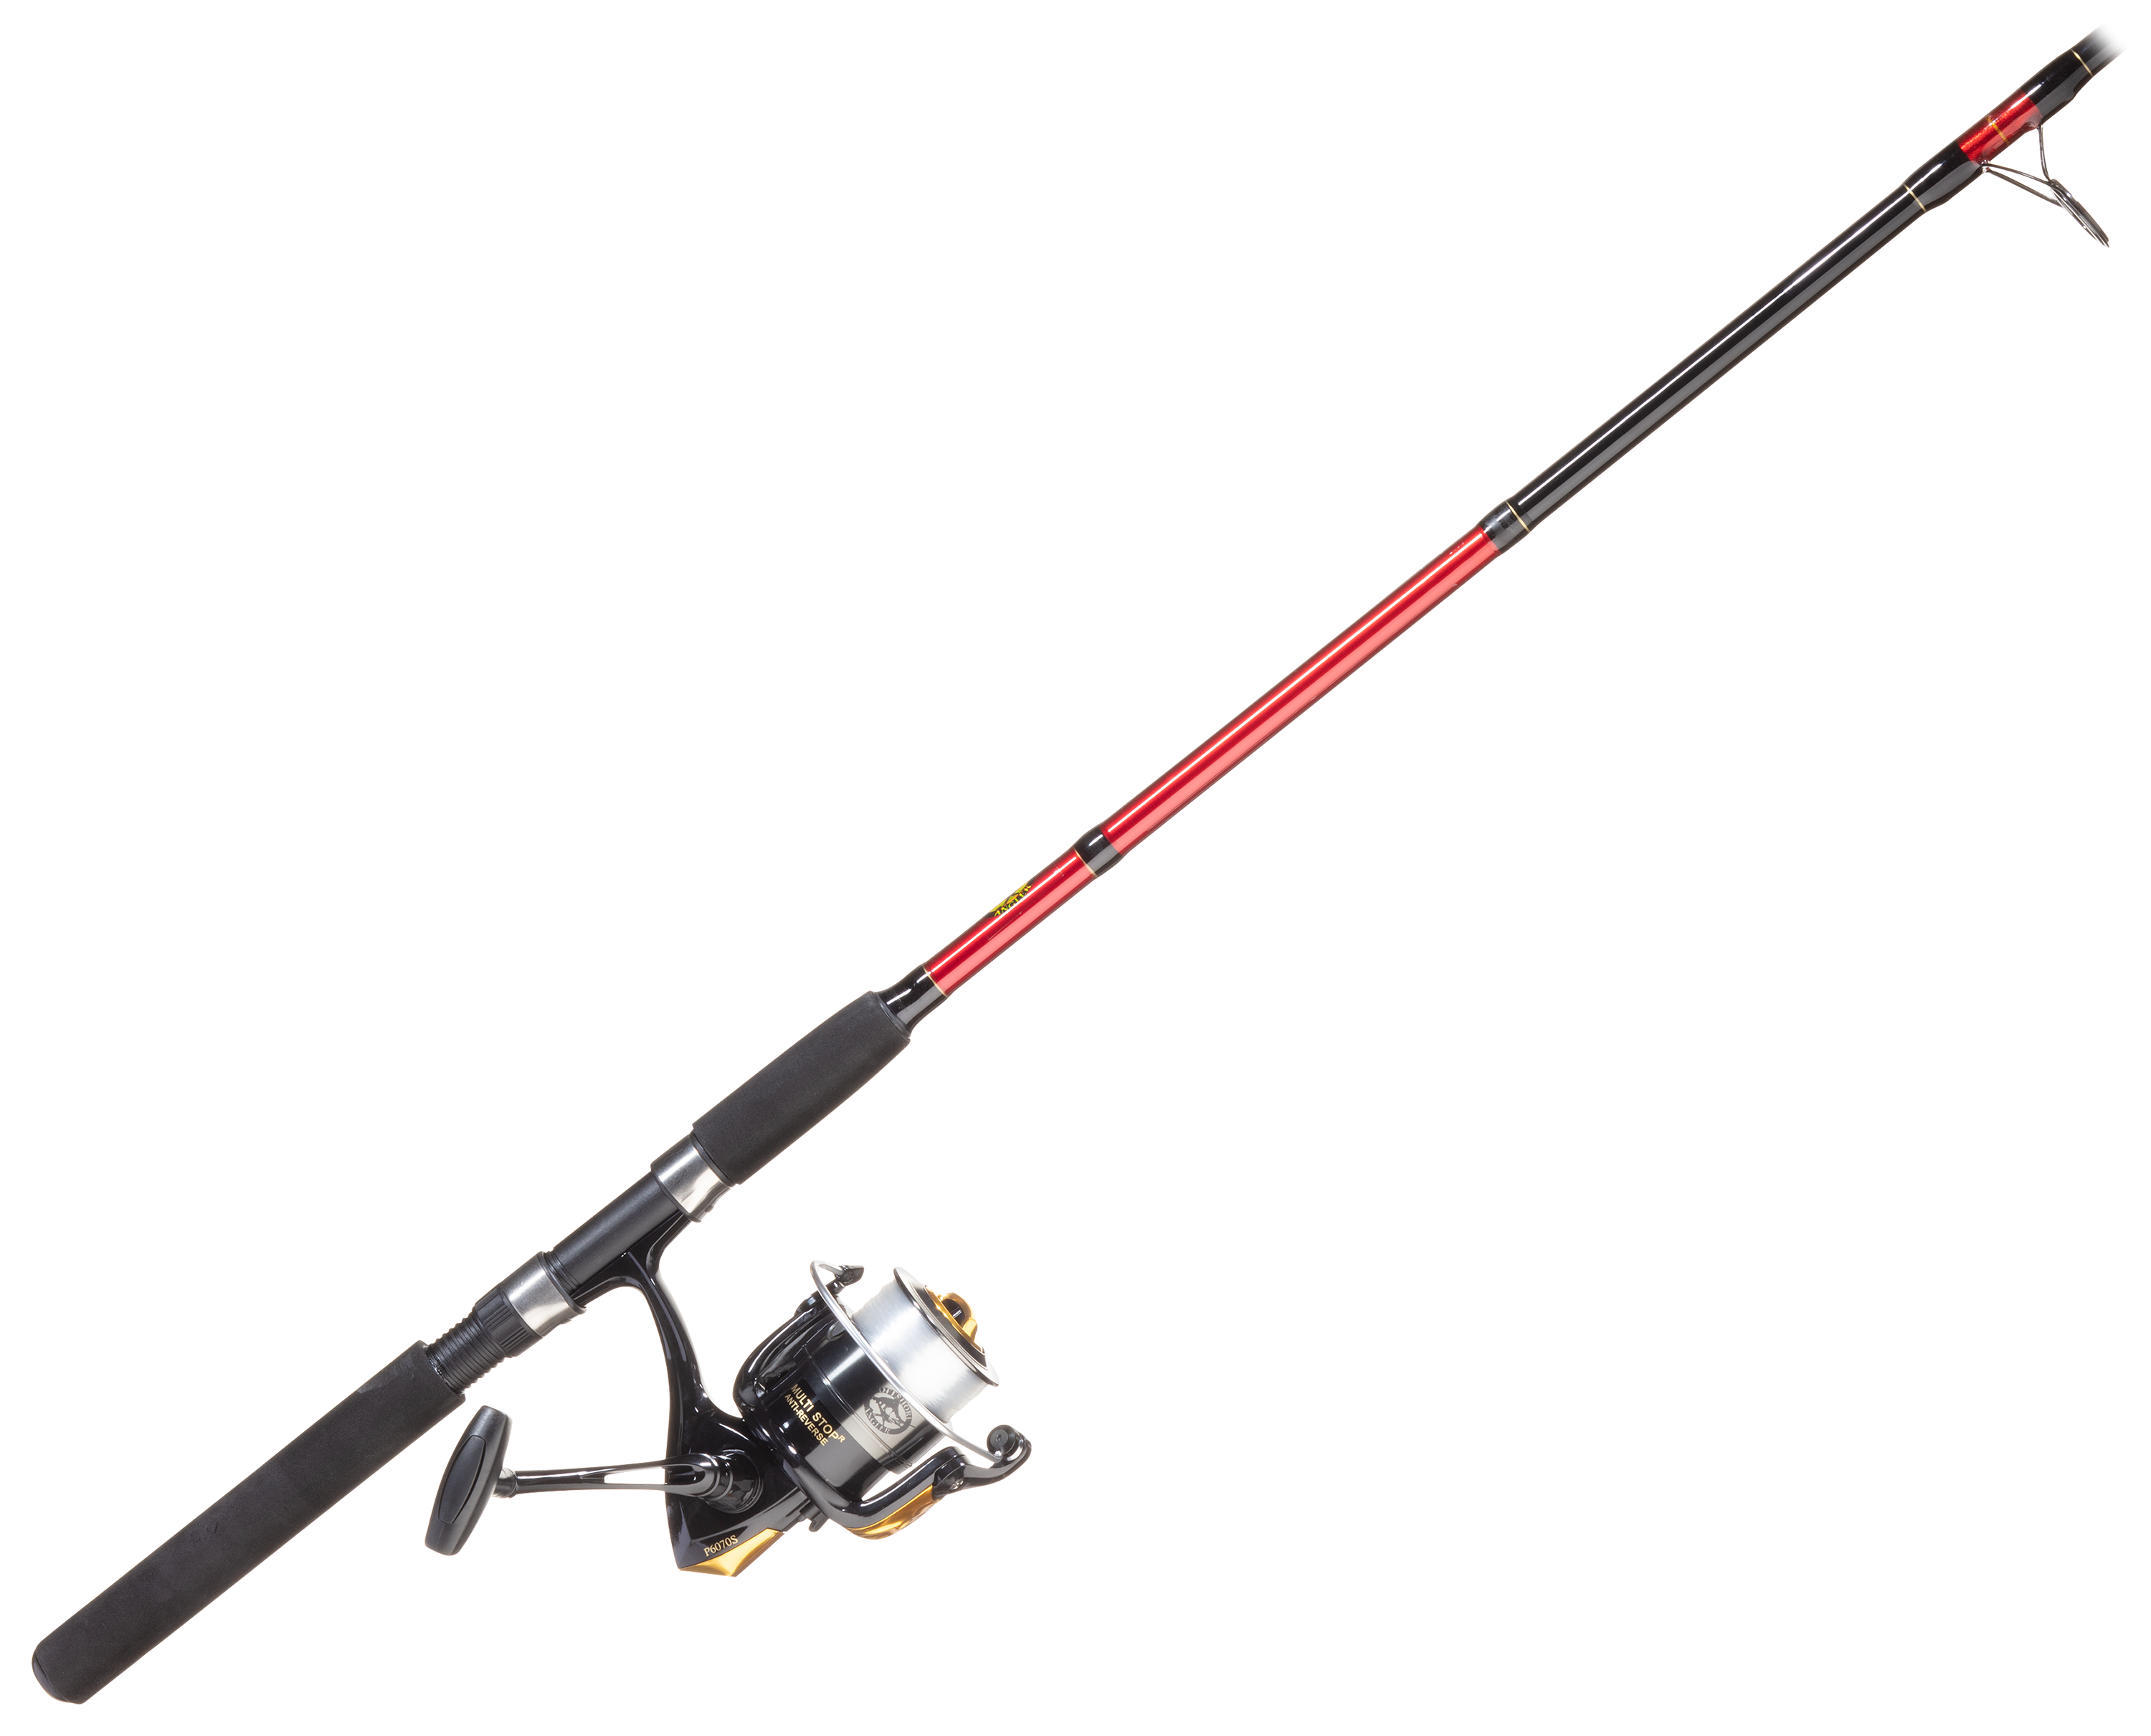 Offshore Angler Purple Tightline Spinning Rod and Reel Combo